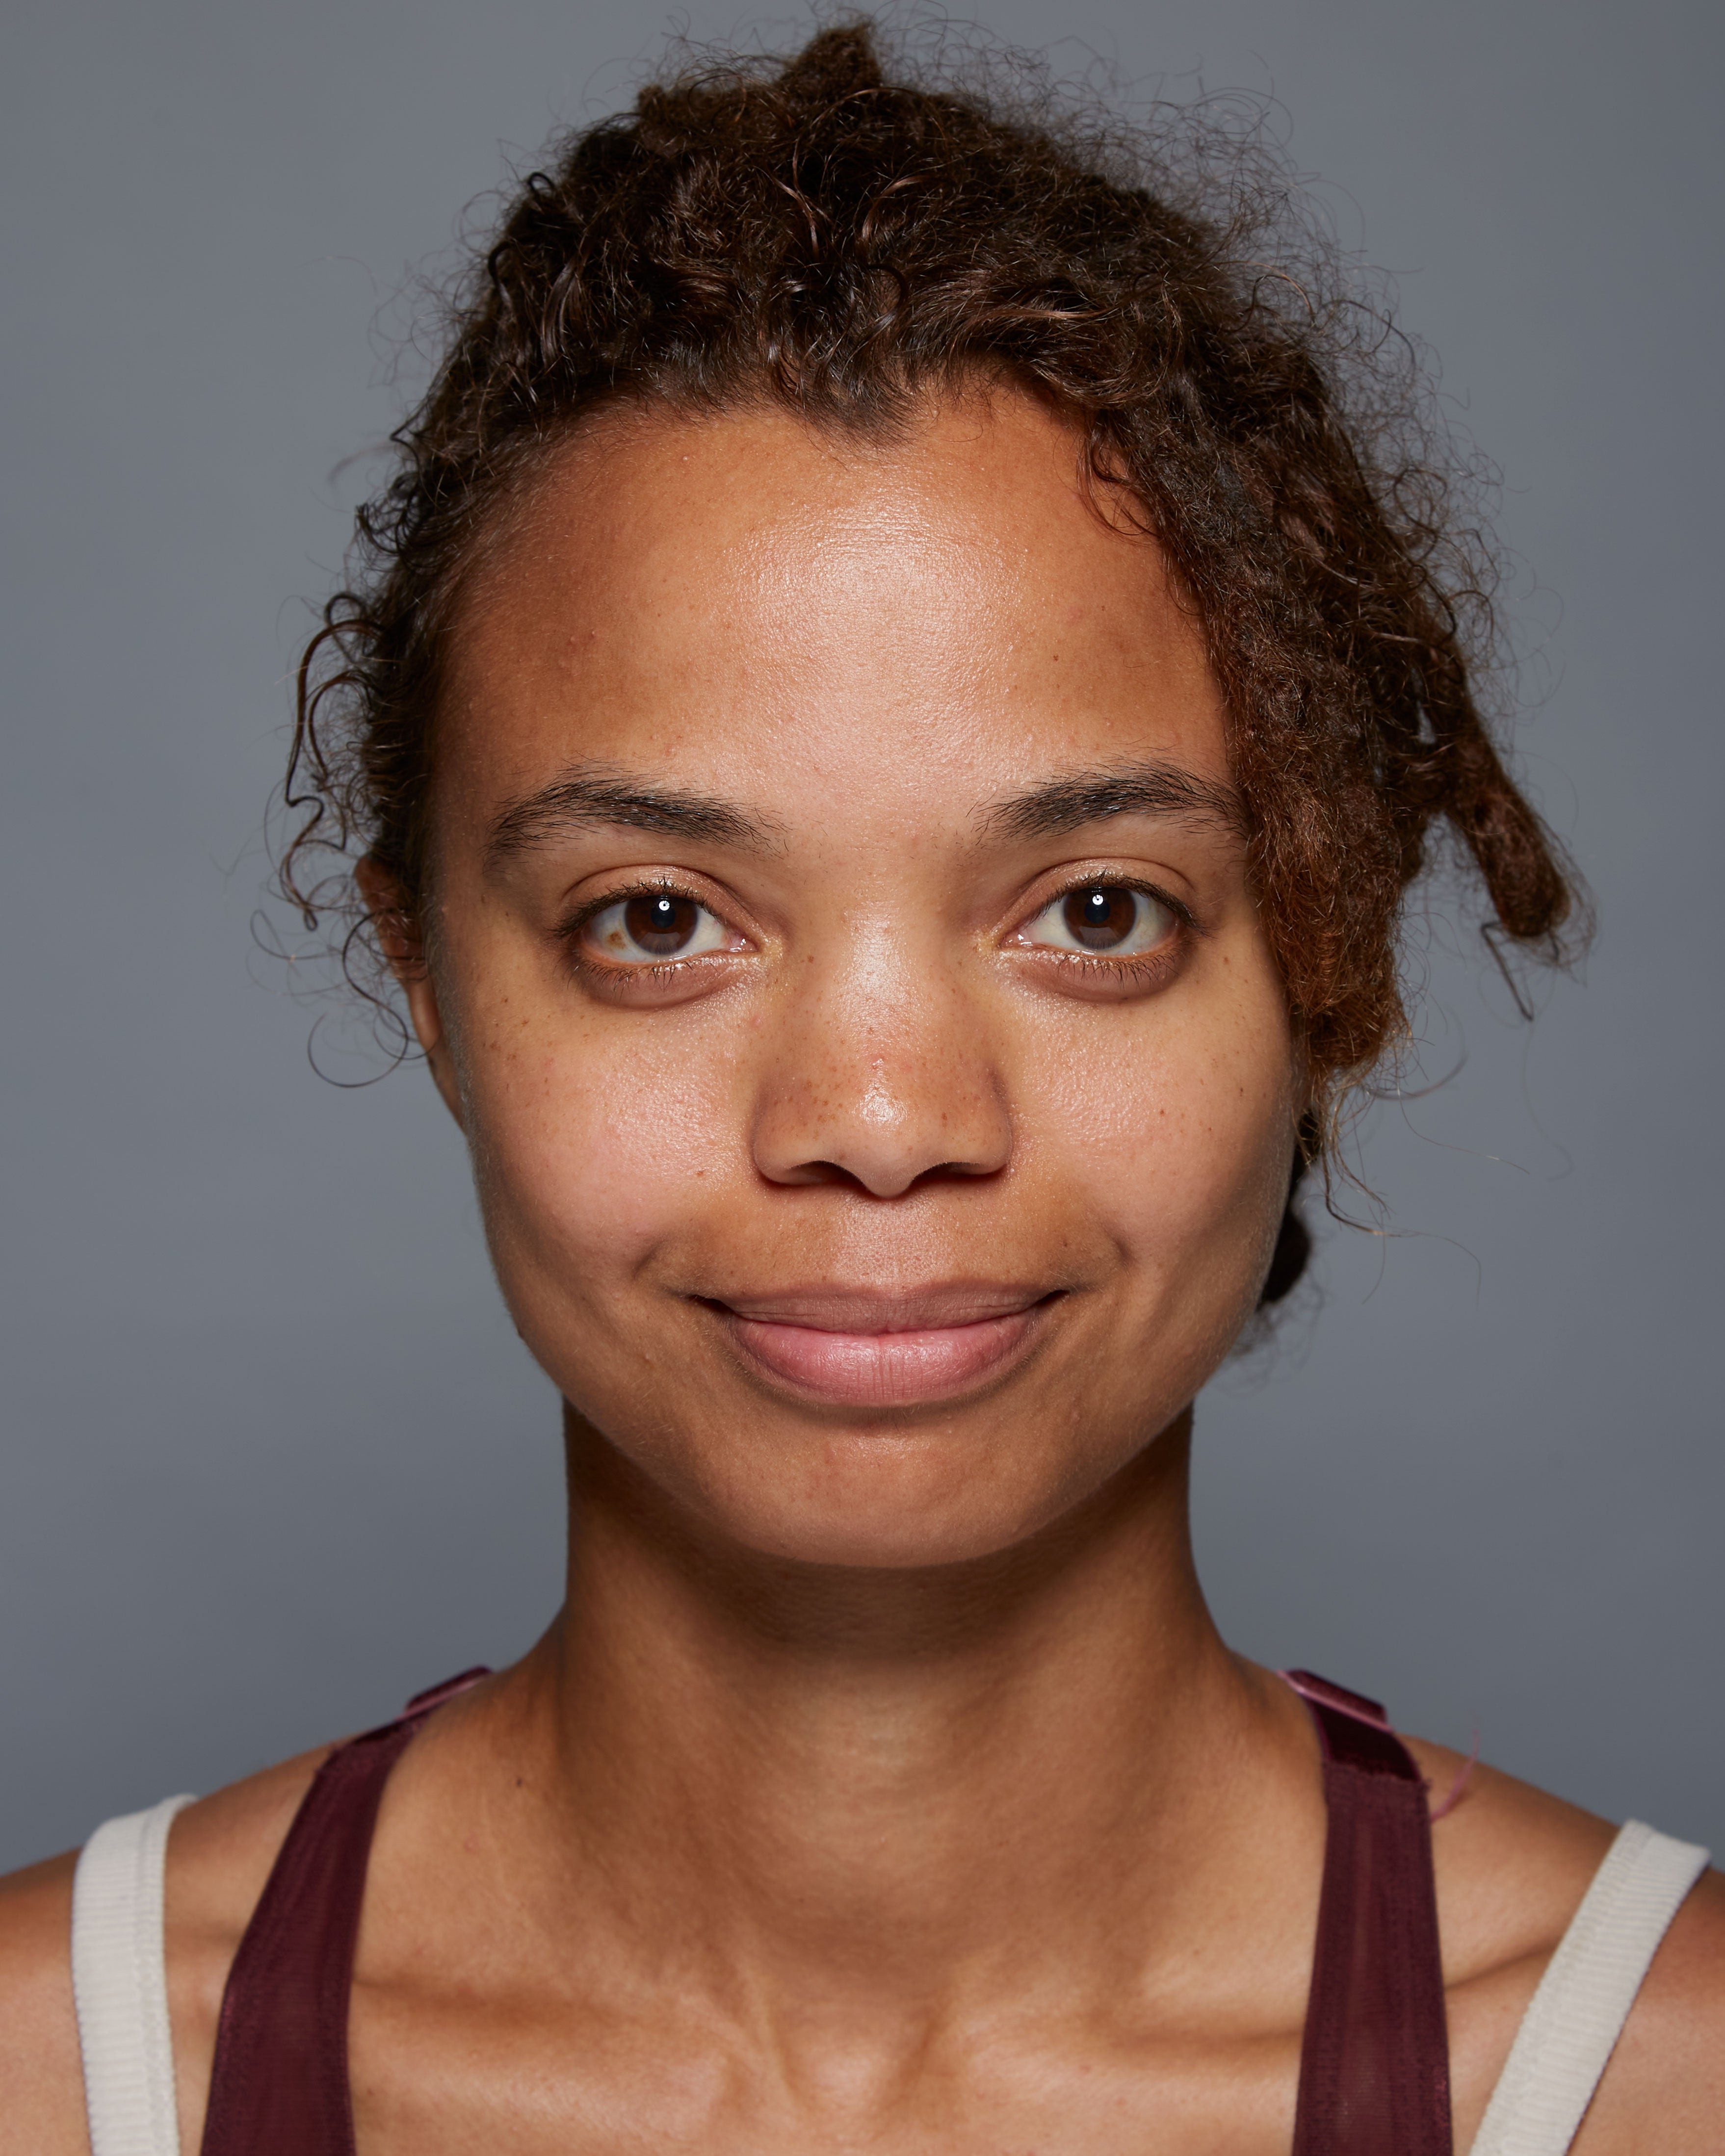 "Before" headshot of a clinical subject who has used Michal Morrison Genesis BSTEM6 Molecular Serum, showing a young African-American woman with brown hair smiling at camera.